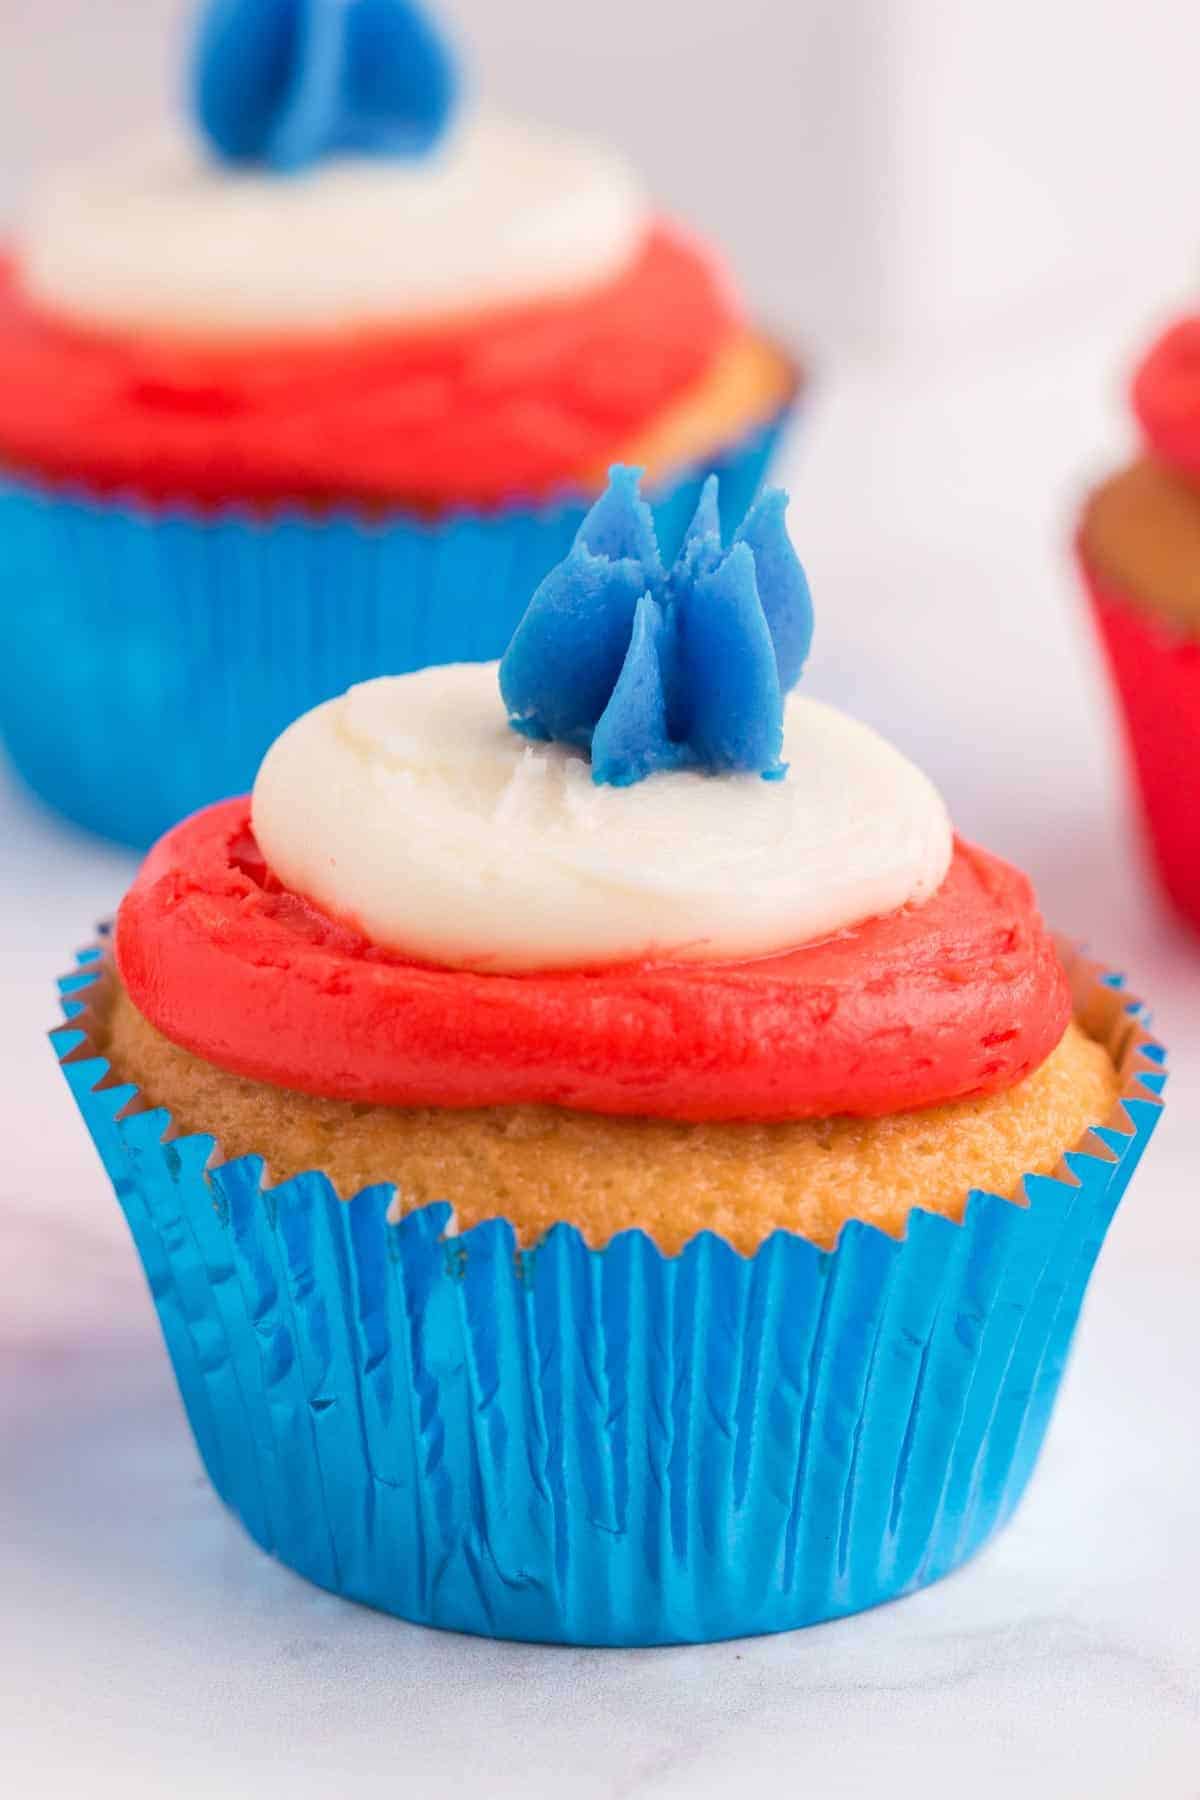 Gluten free 4th of July cupcakes.